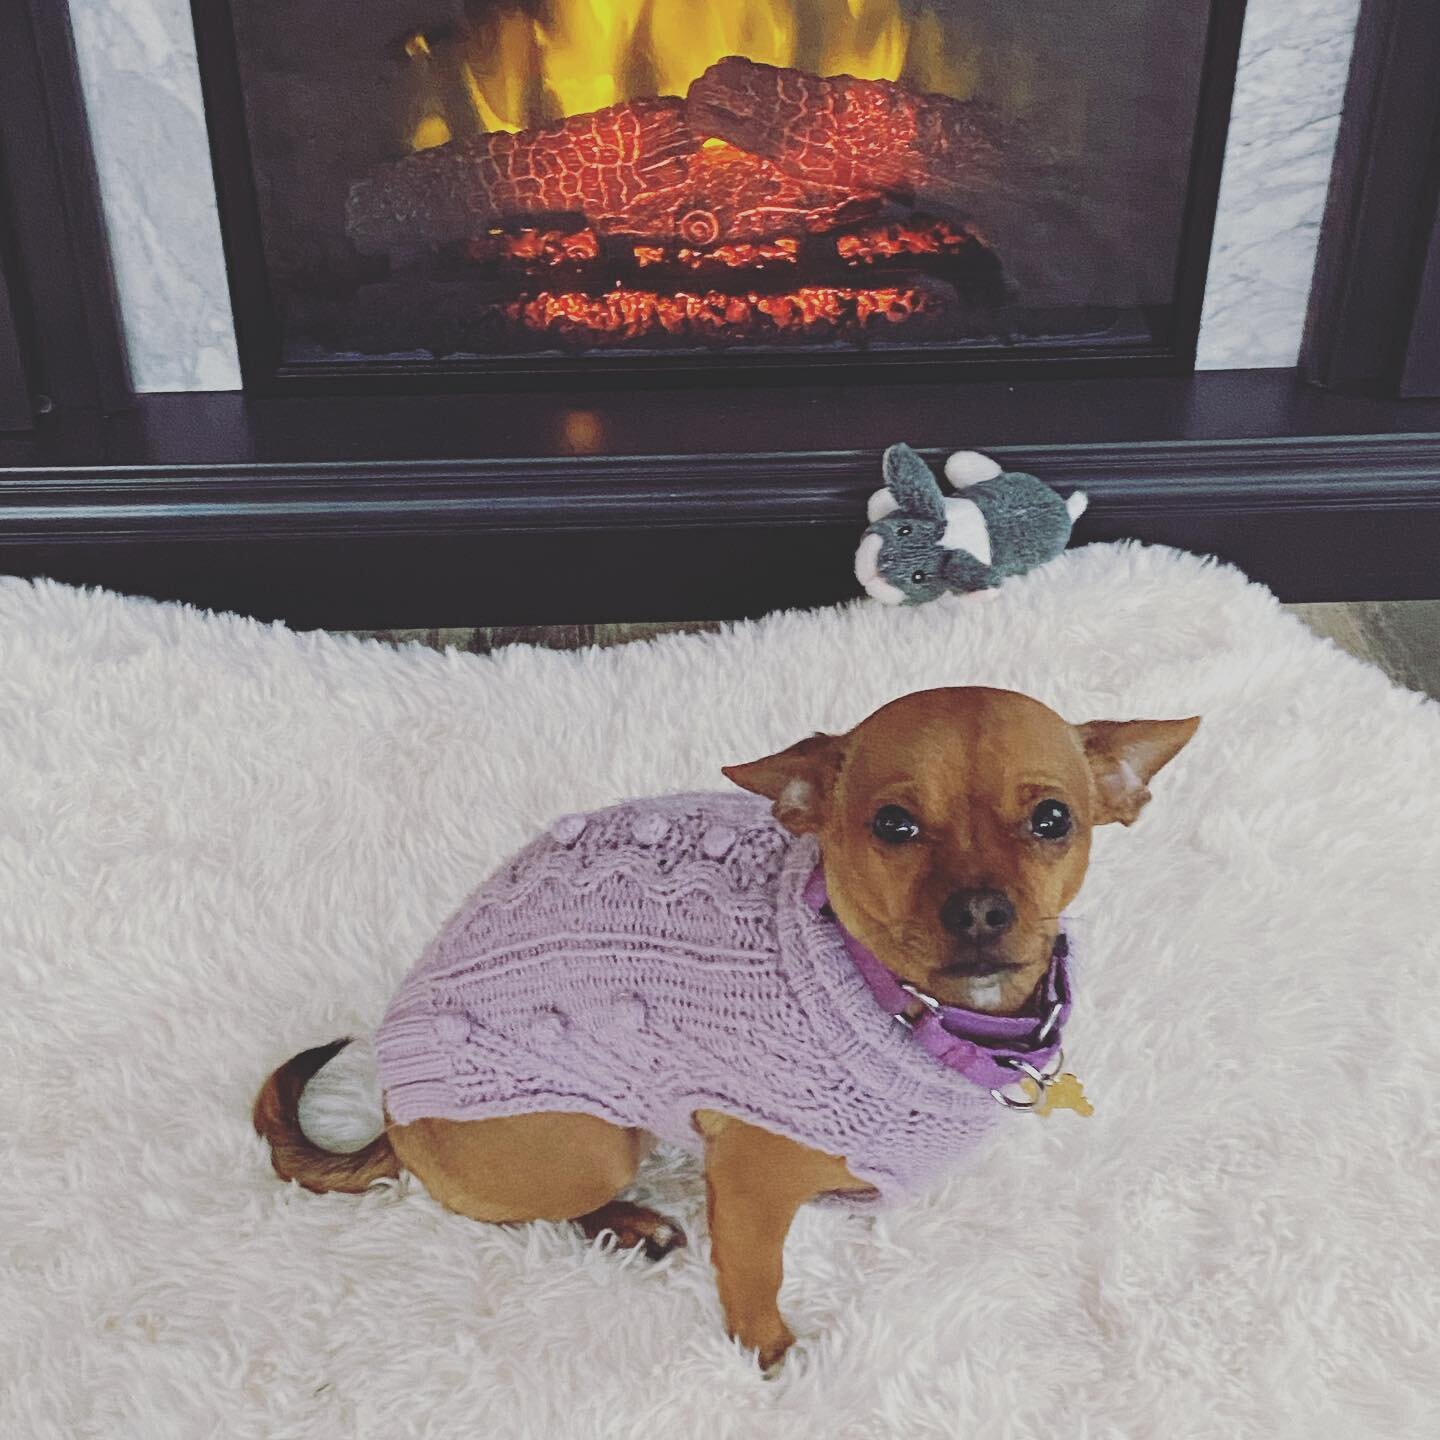 It is for sure sweater weather! ❄️❄️ Pumpkin is trying to conserve heat in front of the electric fire! #dogdad #chihuahuasofinstagram #texasfreeze #texas #snow #cold #coldweather